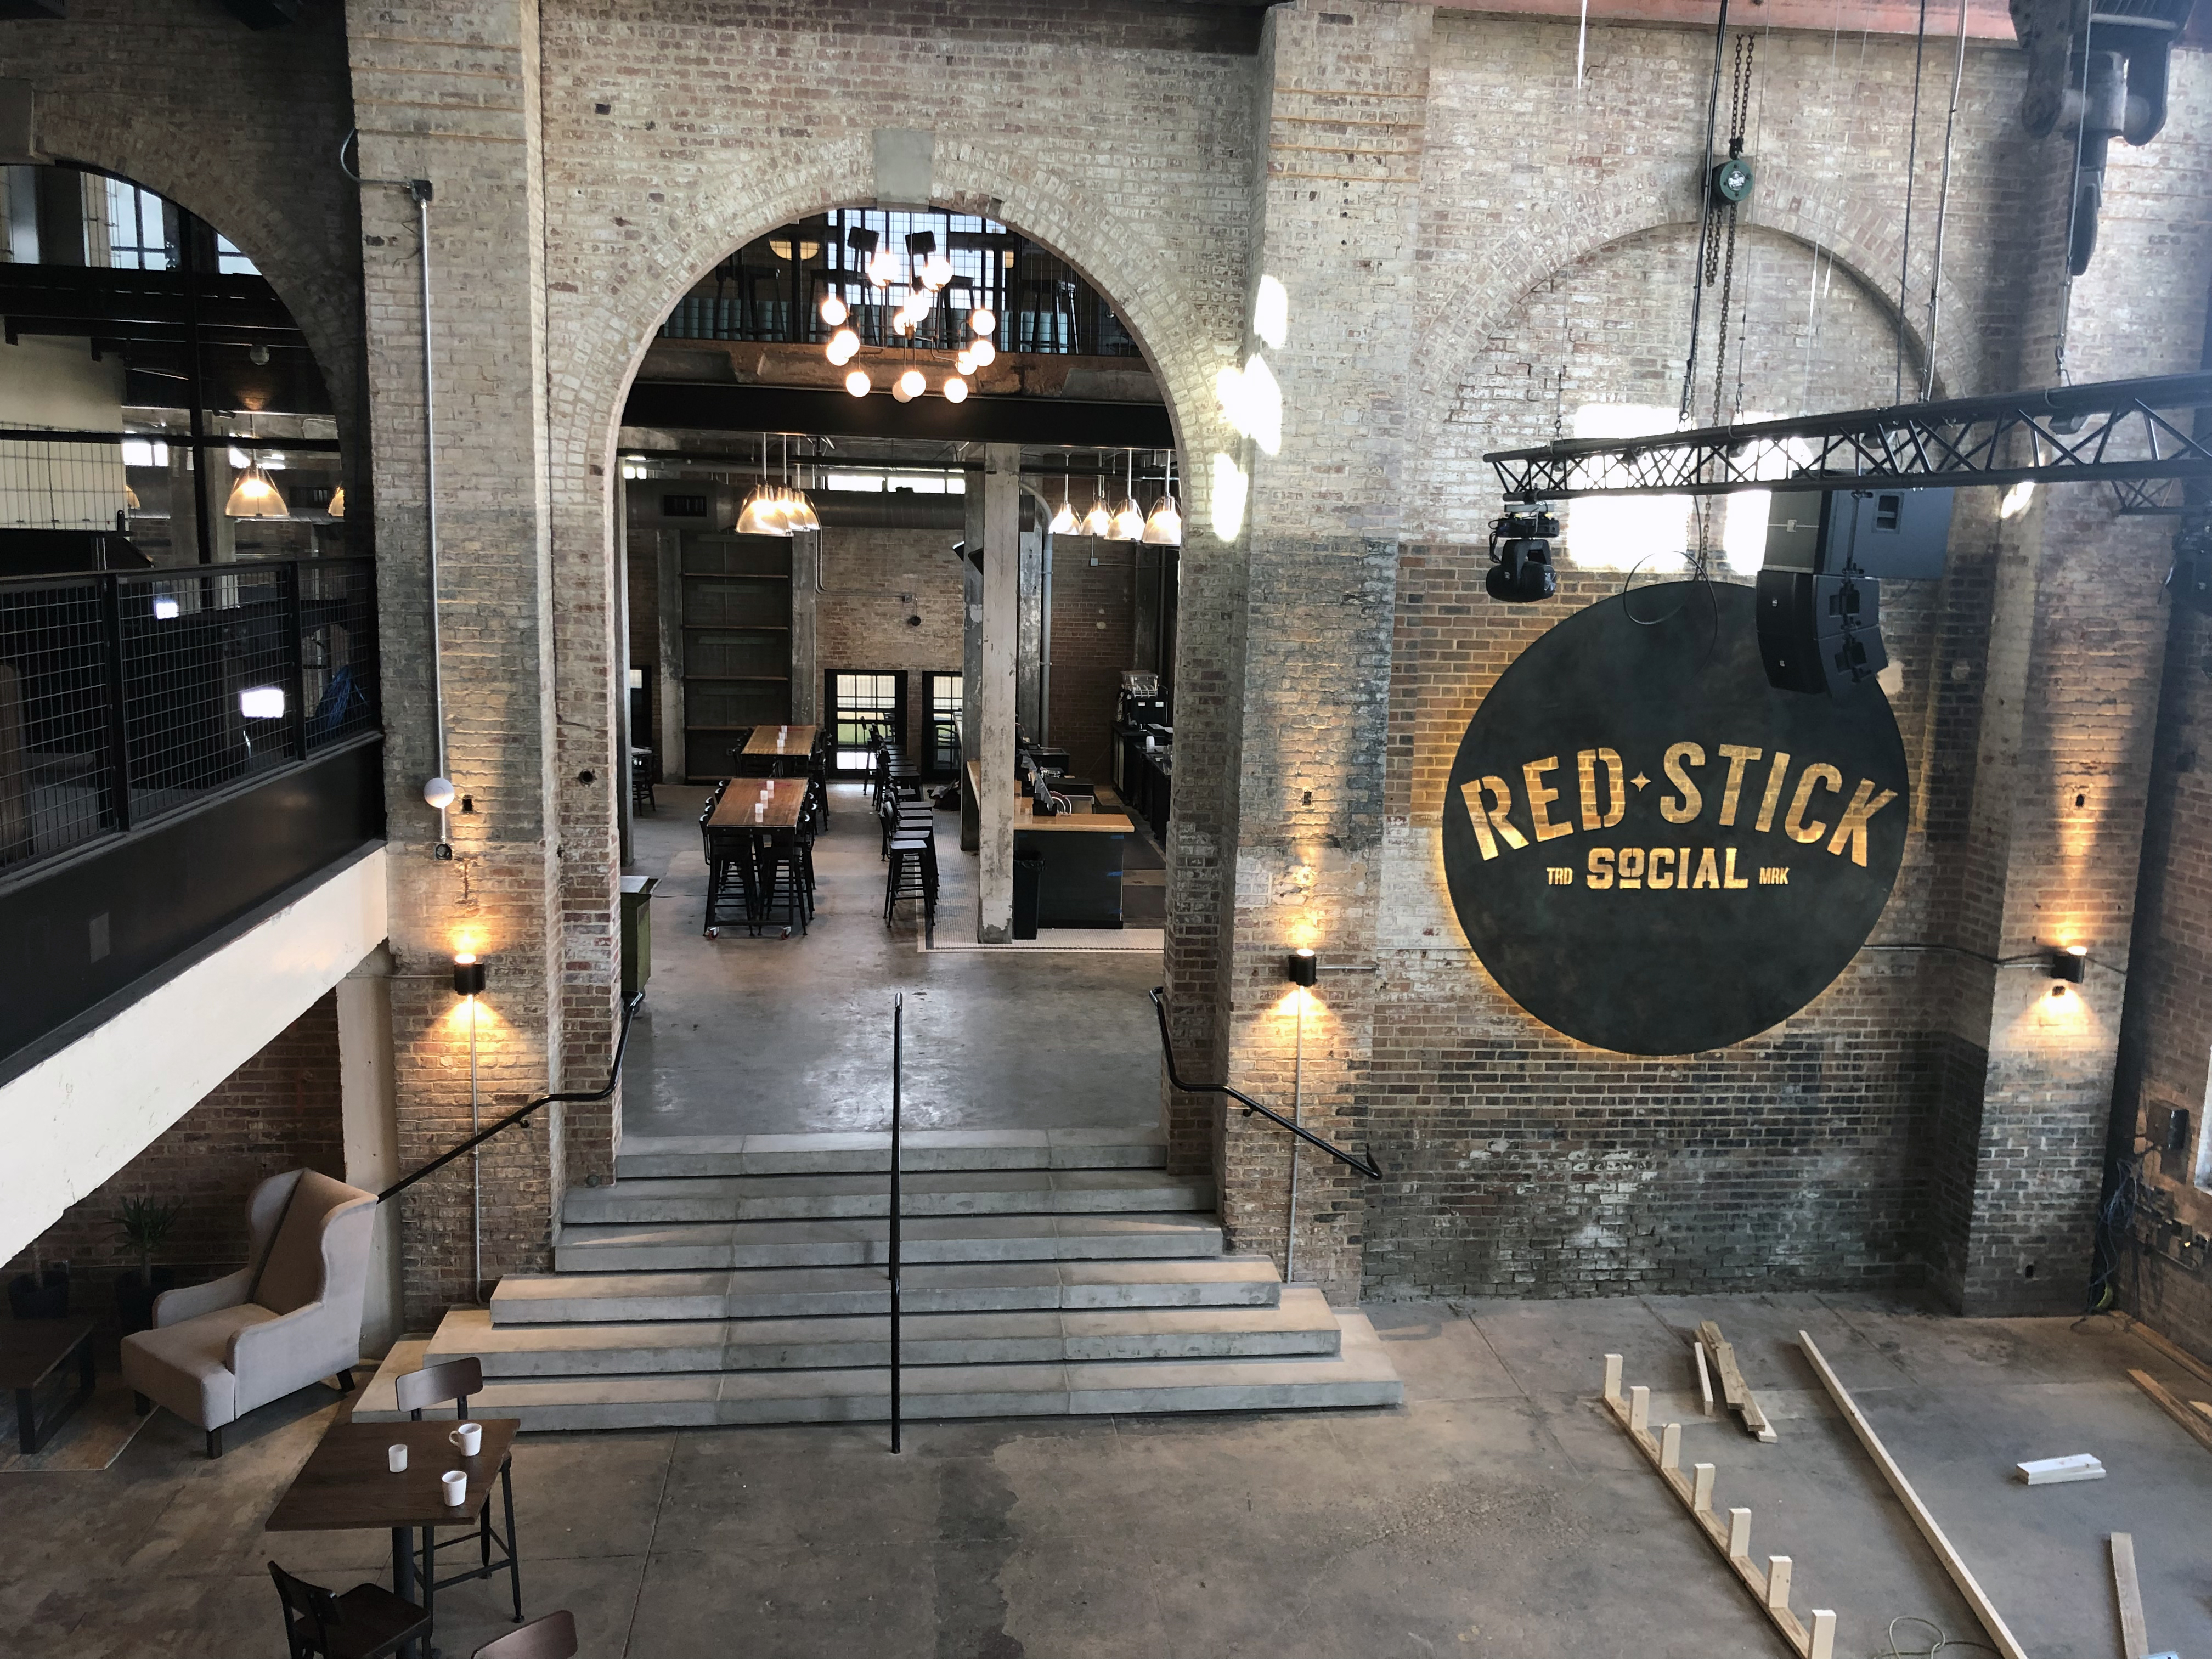 Red Stick Social - Picture of Red Stick Social, Baton Rouge